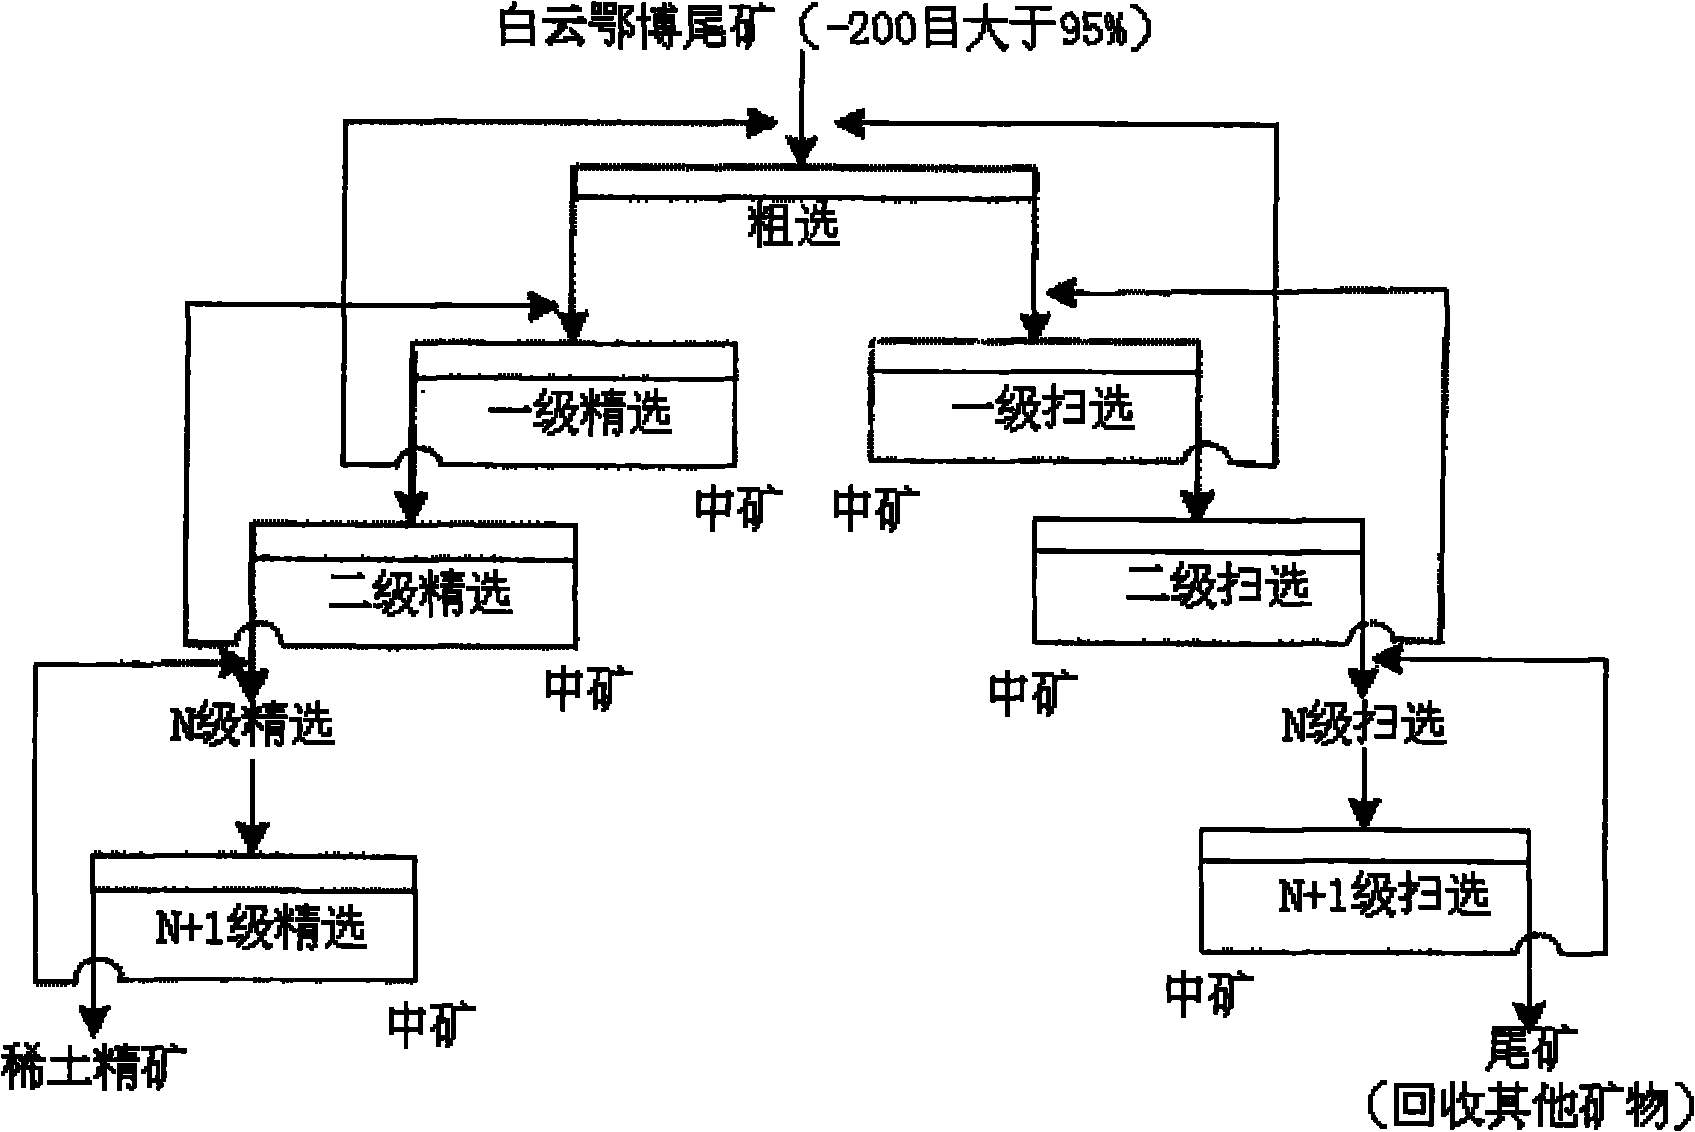 Method for flotation of rare earth from Baiyunebo tailings